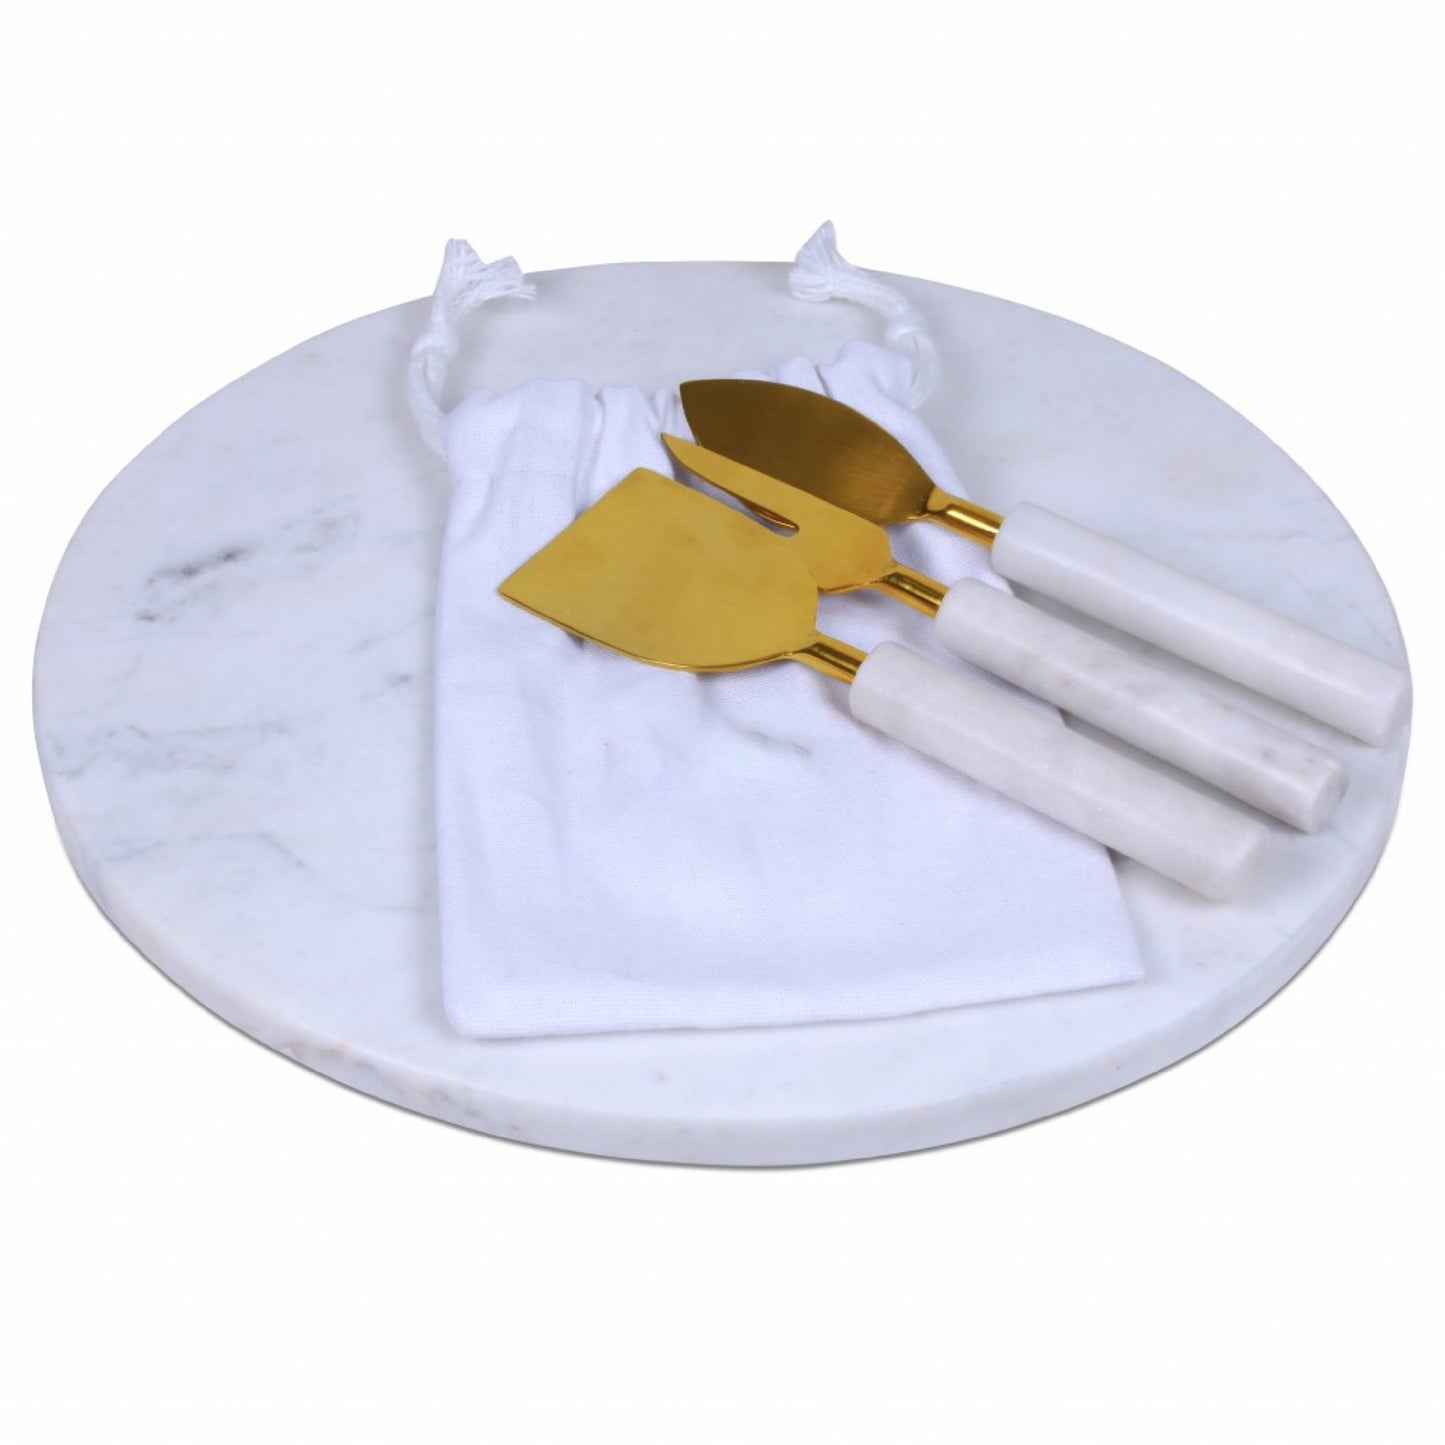 12" Round White Marble Cheese Board and Knife Set-4